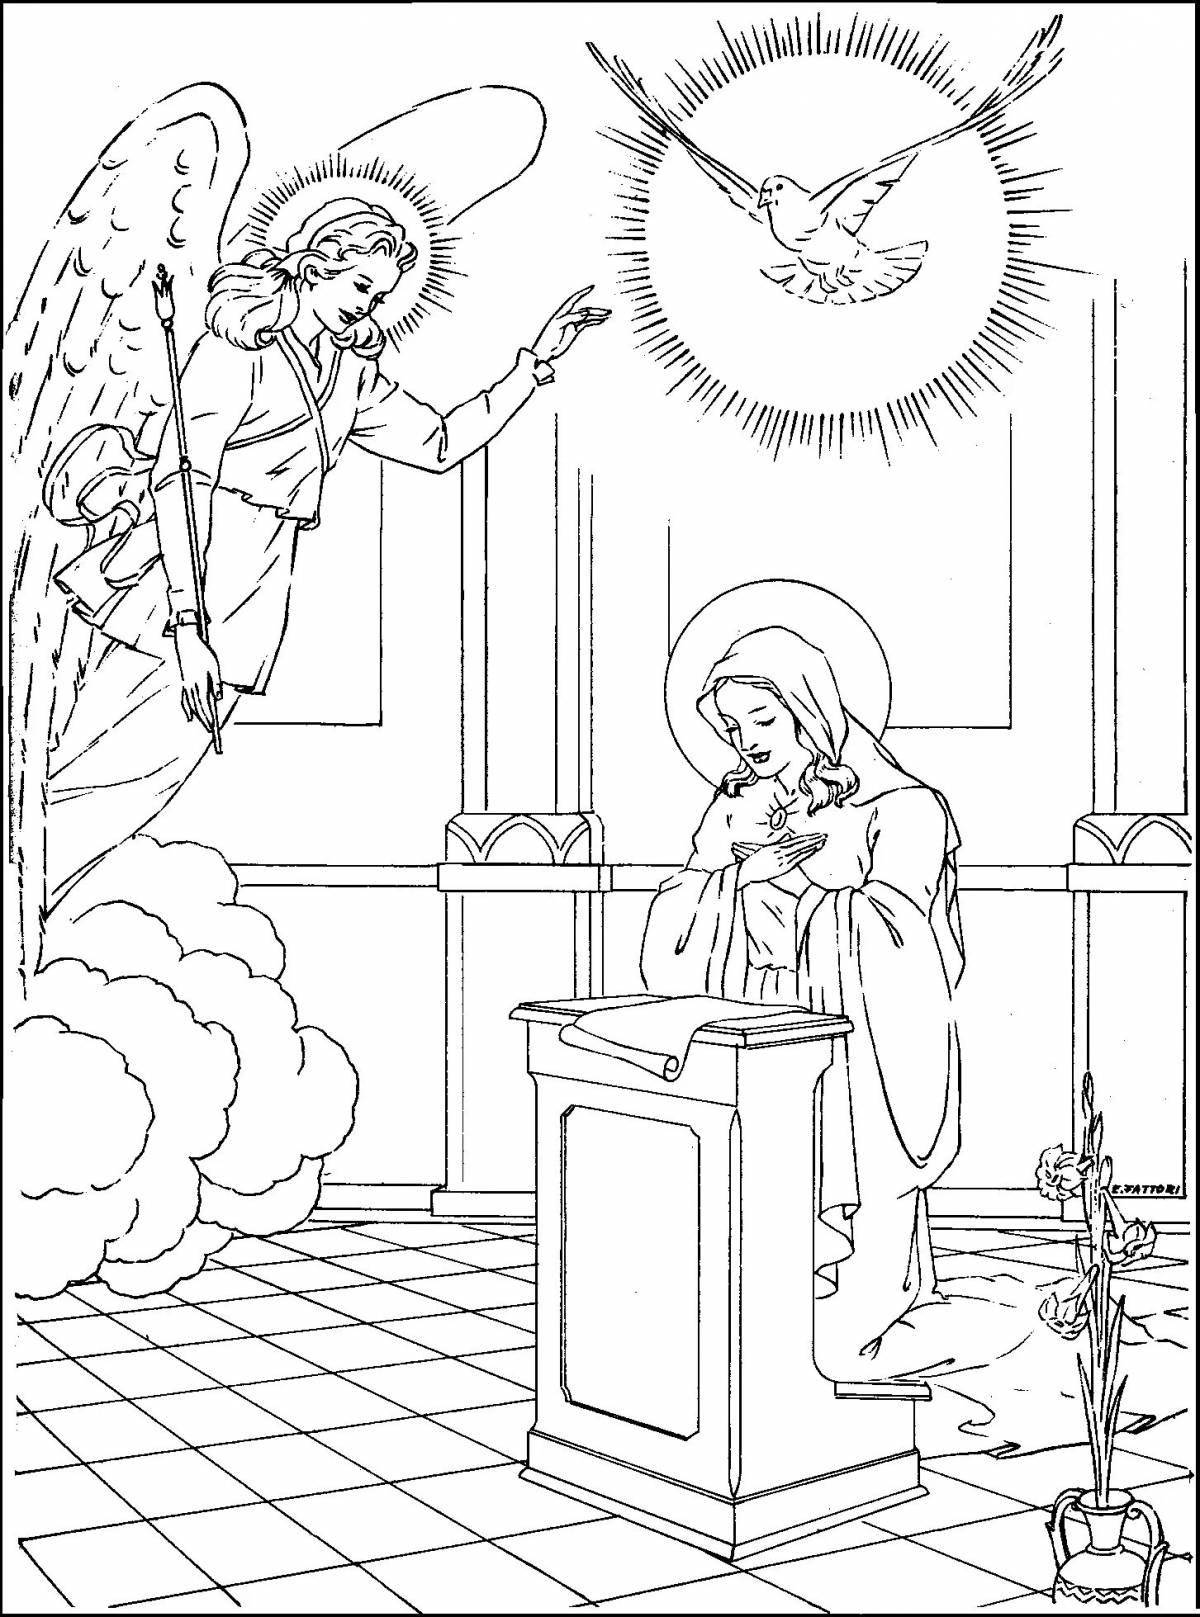 Exquisite orthodox coloring book for kids